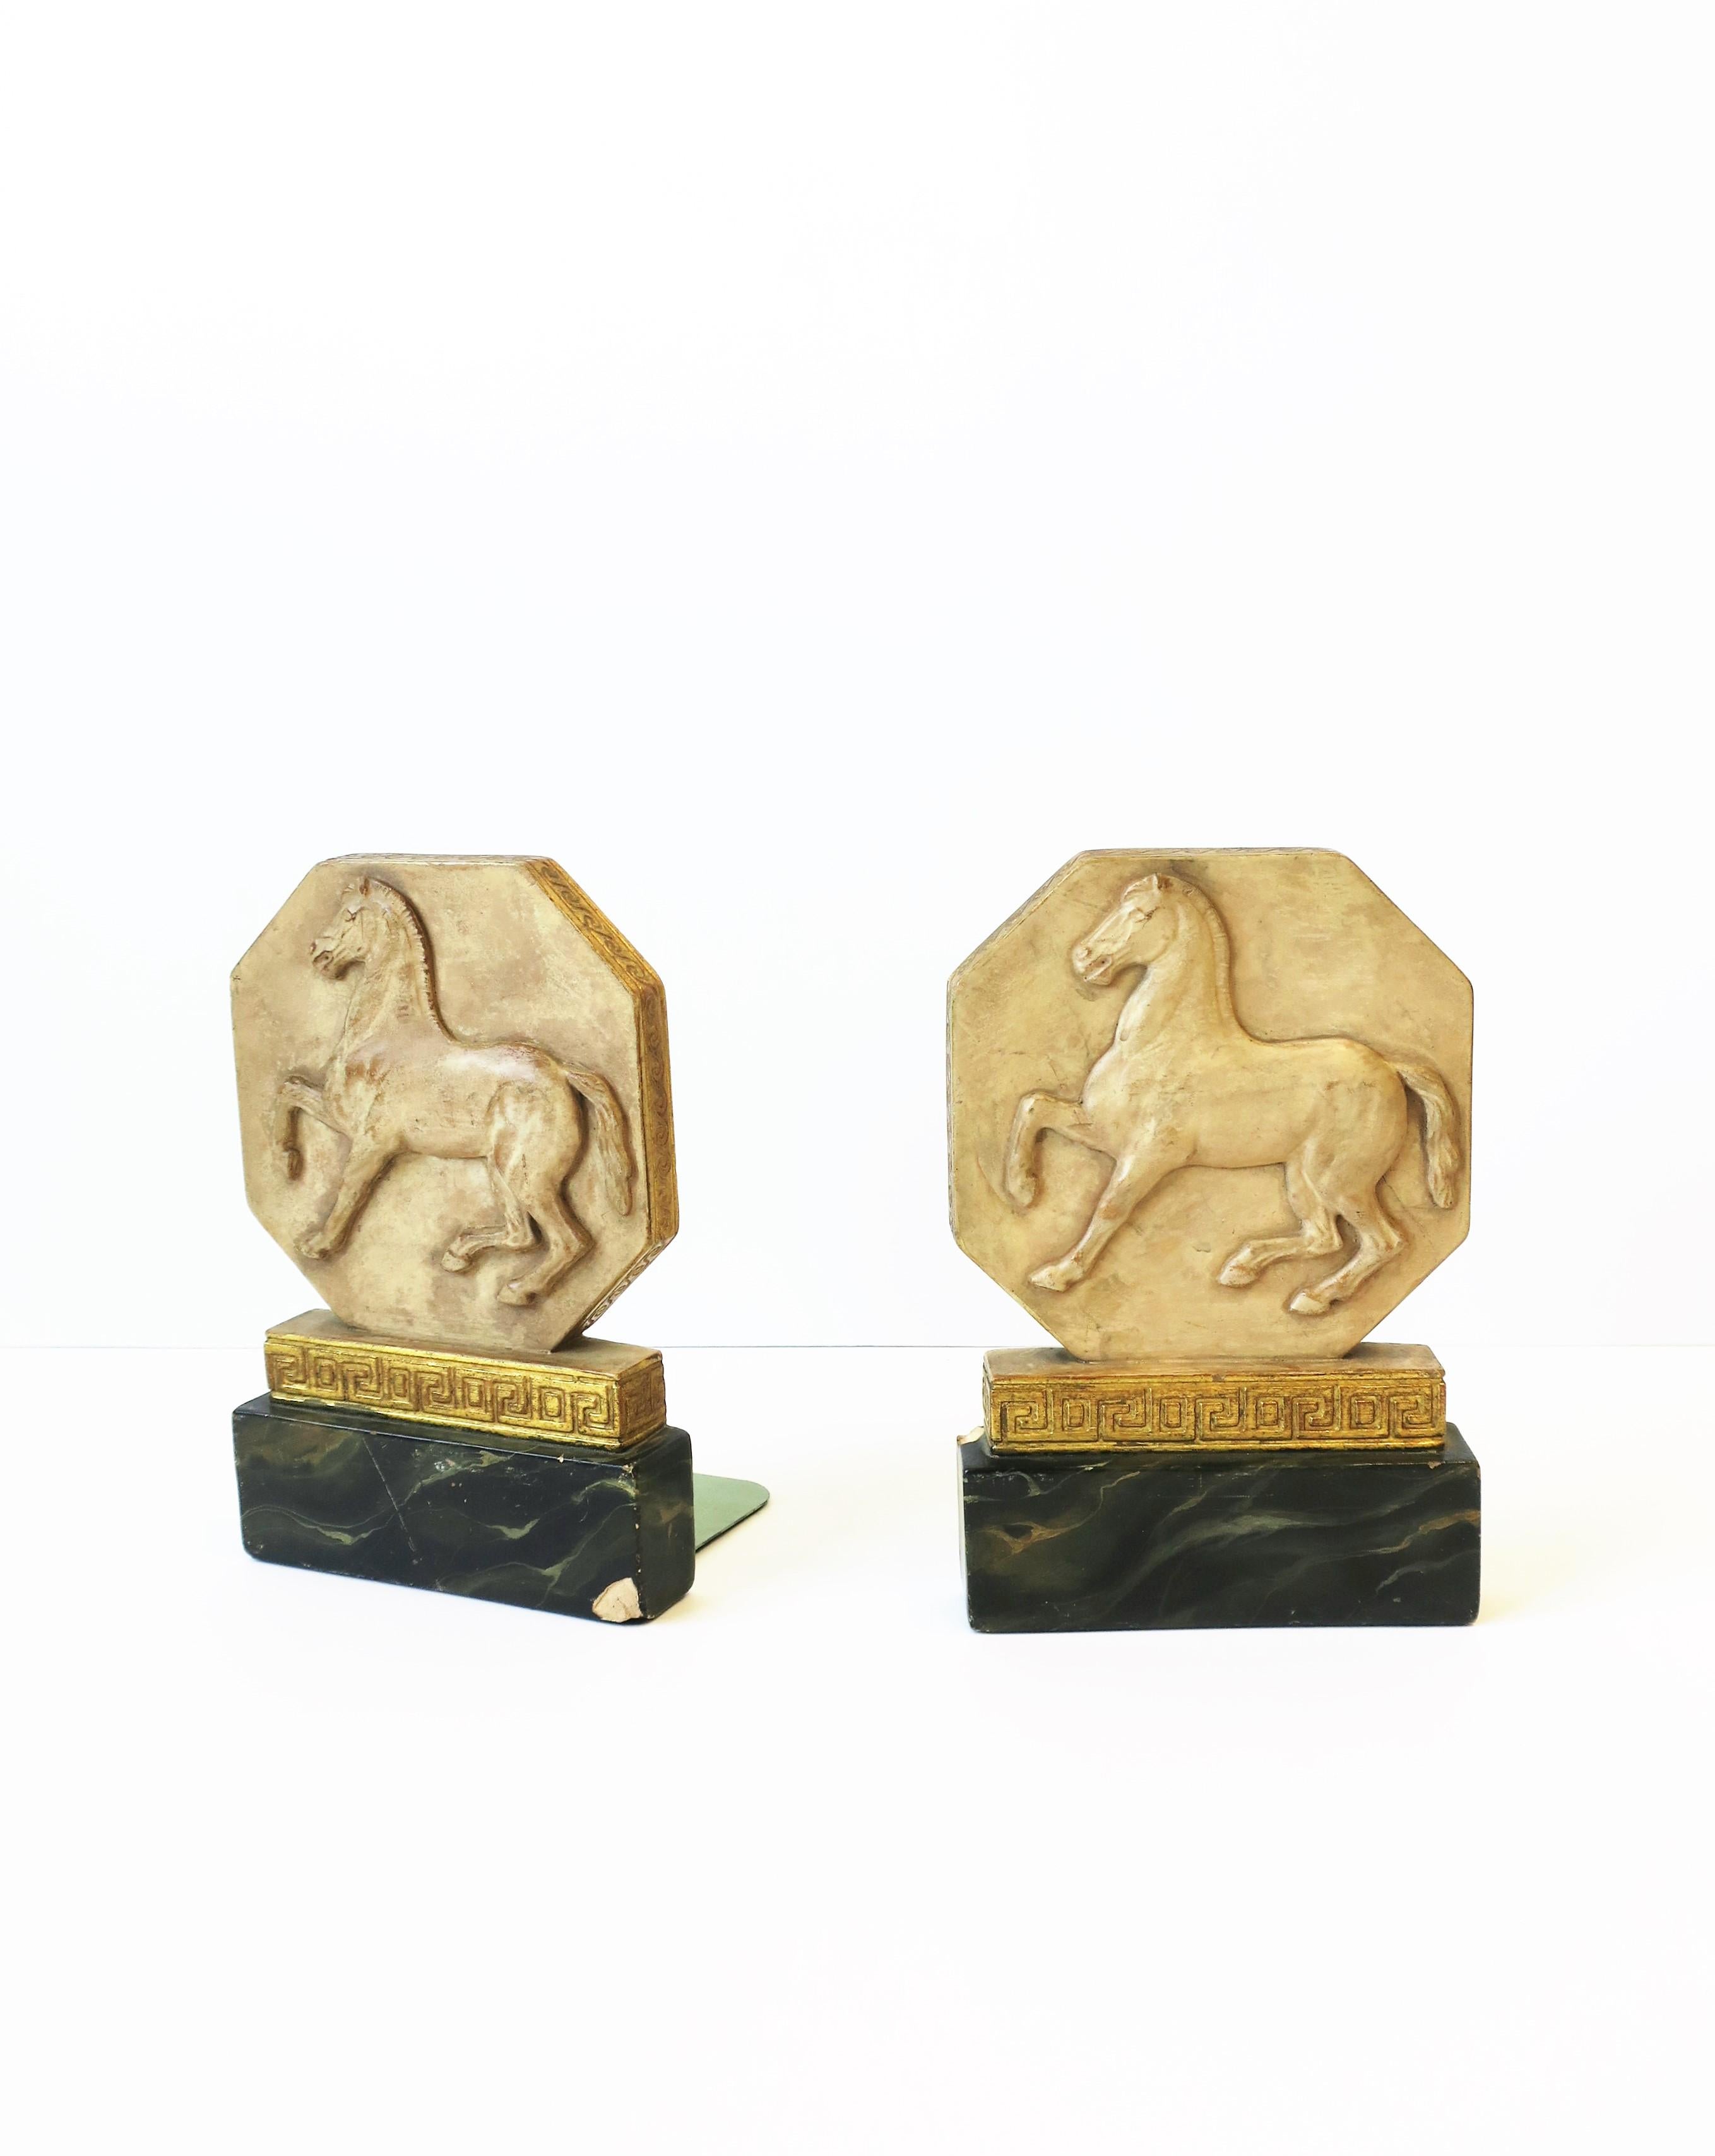 A pair of vintage Italian Regency style chalkware bookends with horse and gold gilt Greek-Key Design, circa early-20th century timeframe, Italy. Dimensions: 4.38